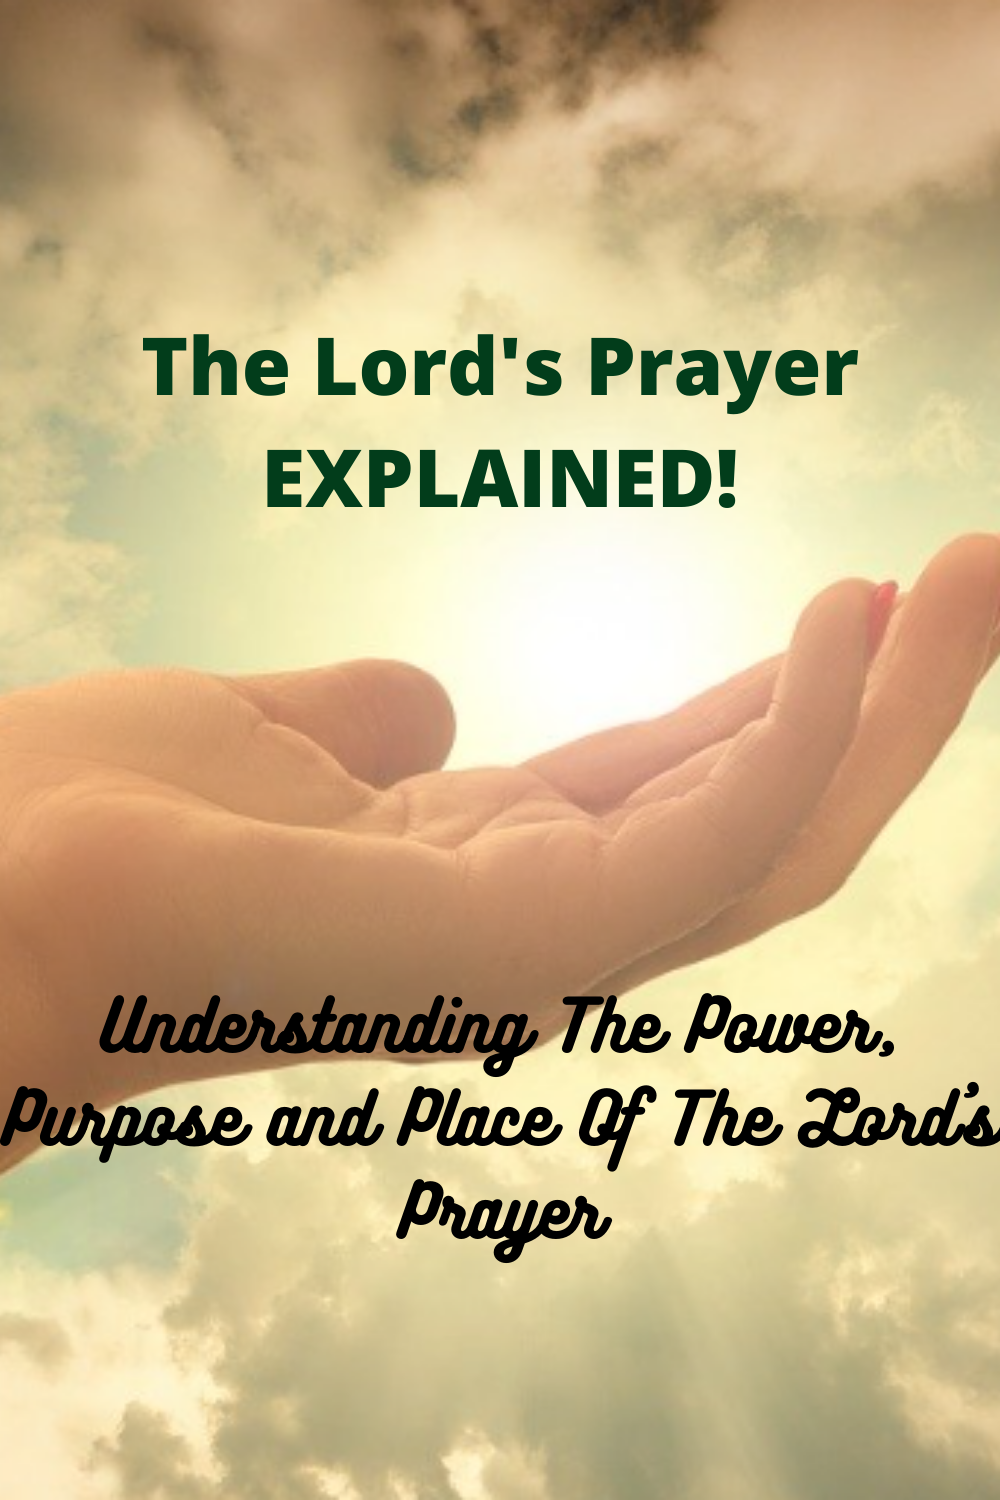 the-lord-s-prayer-explained-its-power-and-purpose-faith-victorious